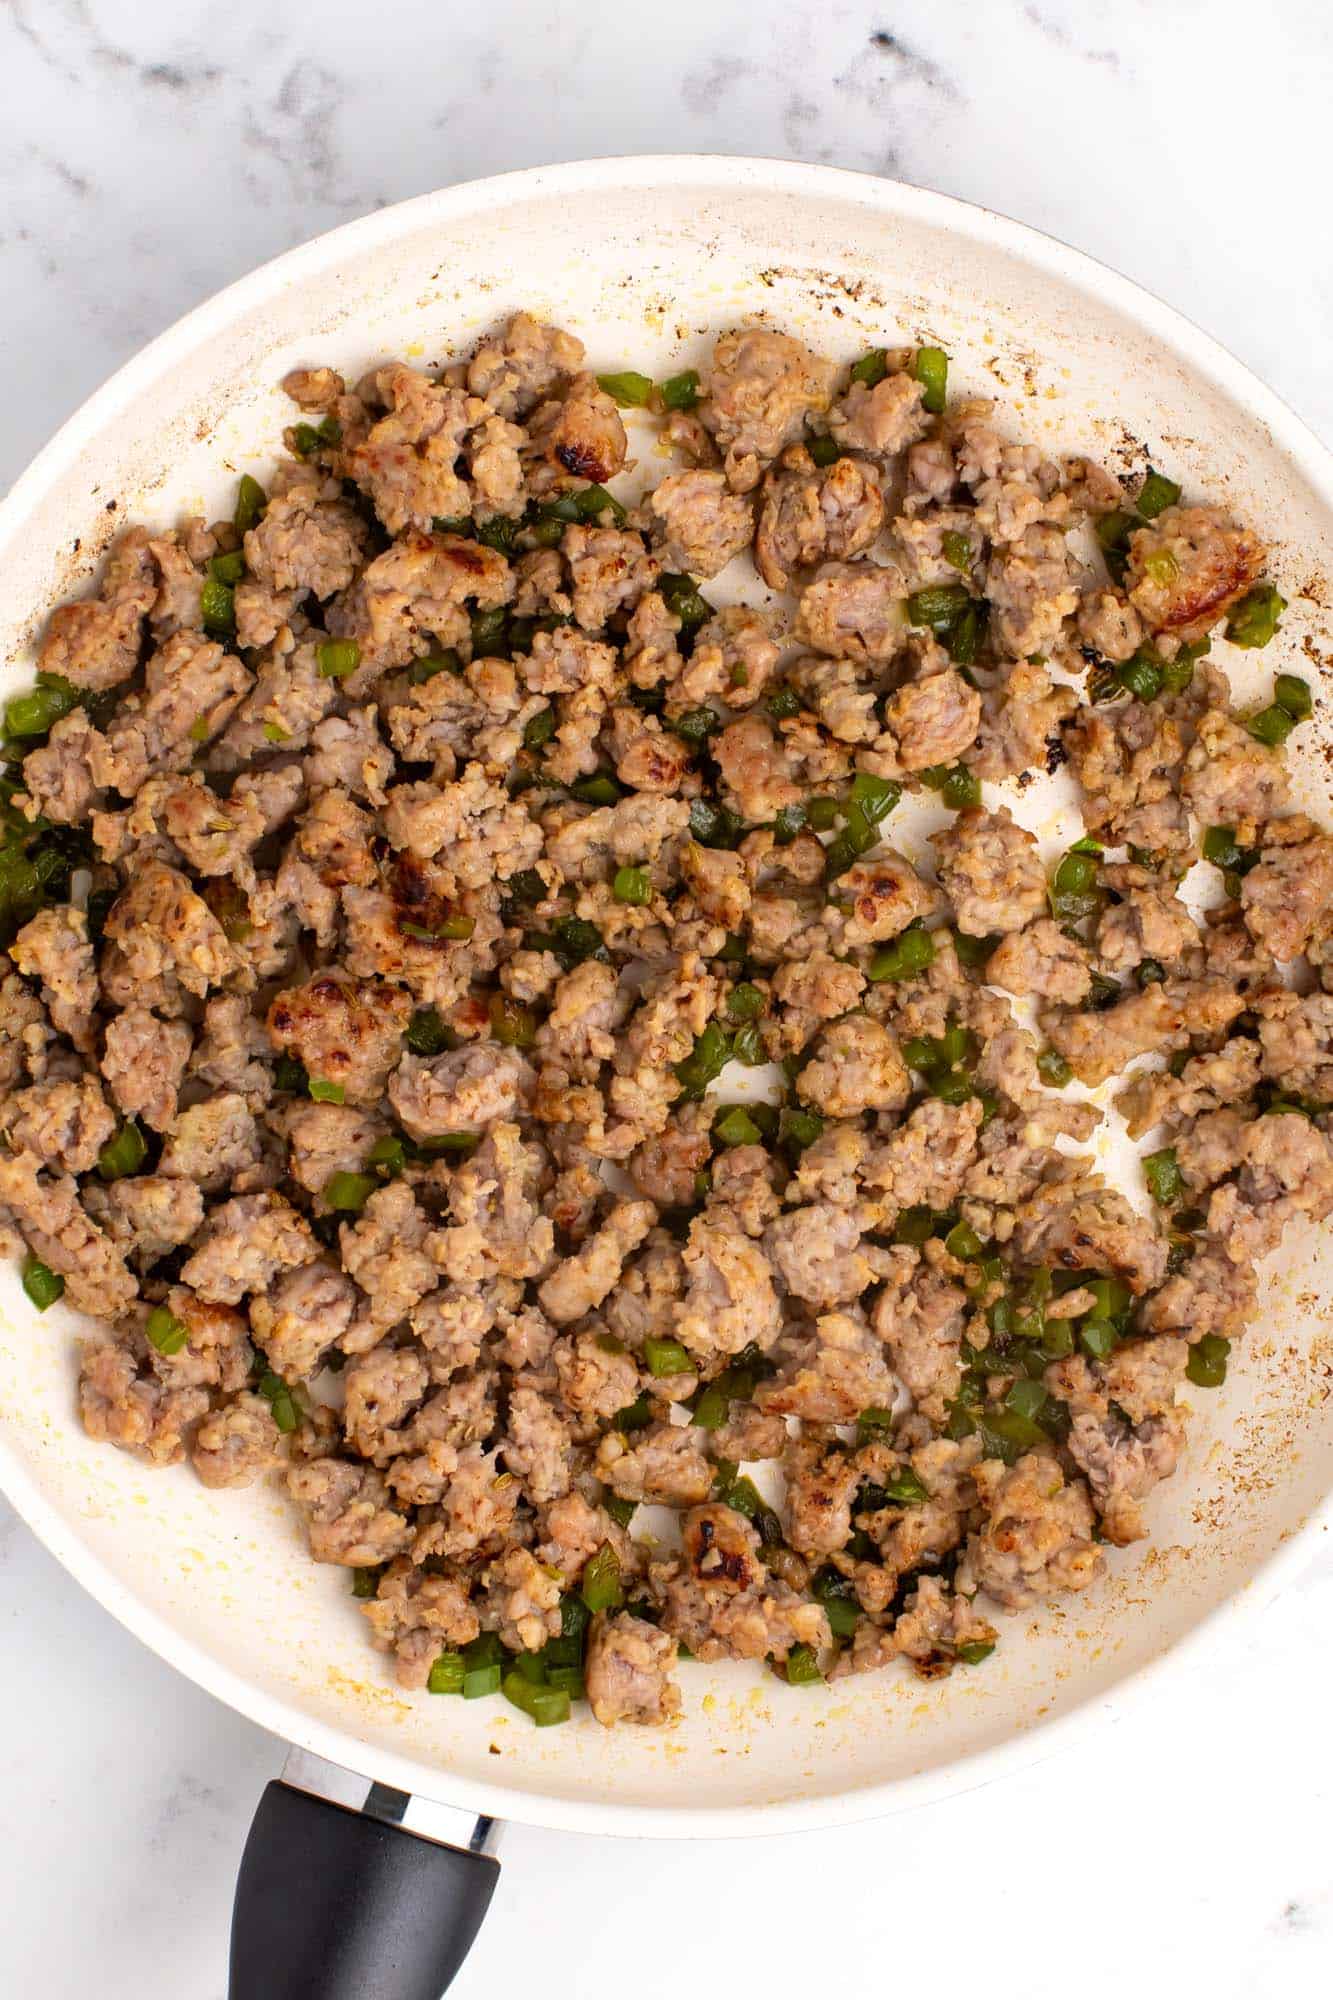 crumbled italian sausage cooked with peppers in a white enameled skillet